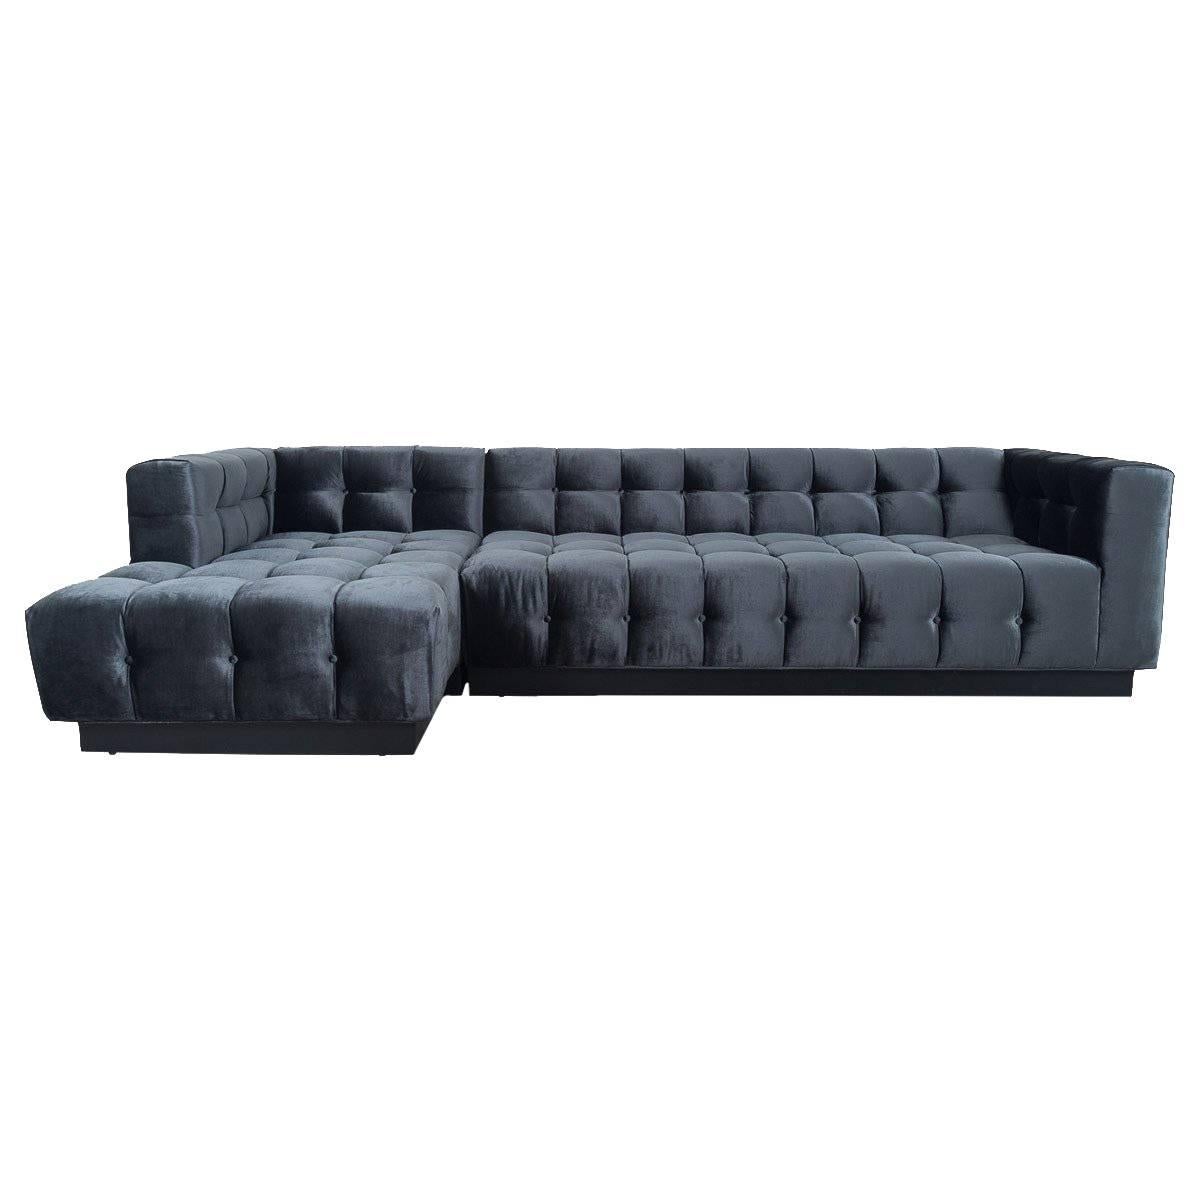 Mid-Century Modern Style Sectional & Chaise Tufted in Black Velvet w/ Toe-Kick For Sale